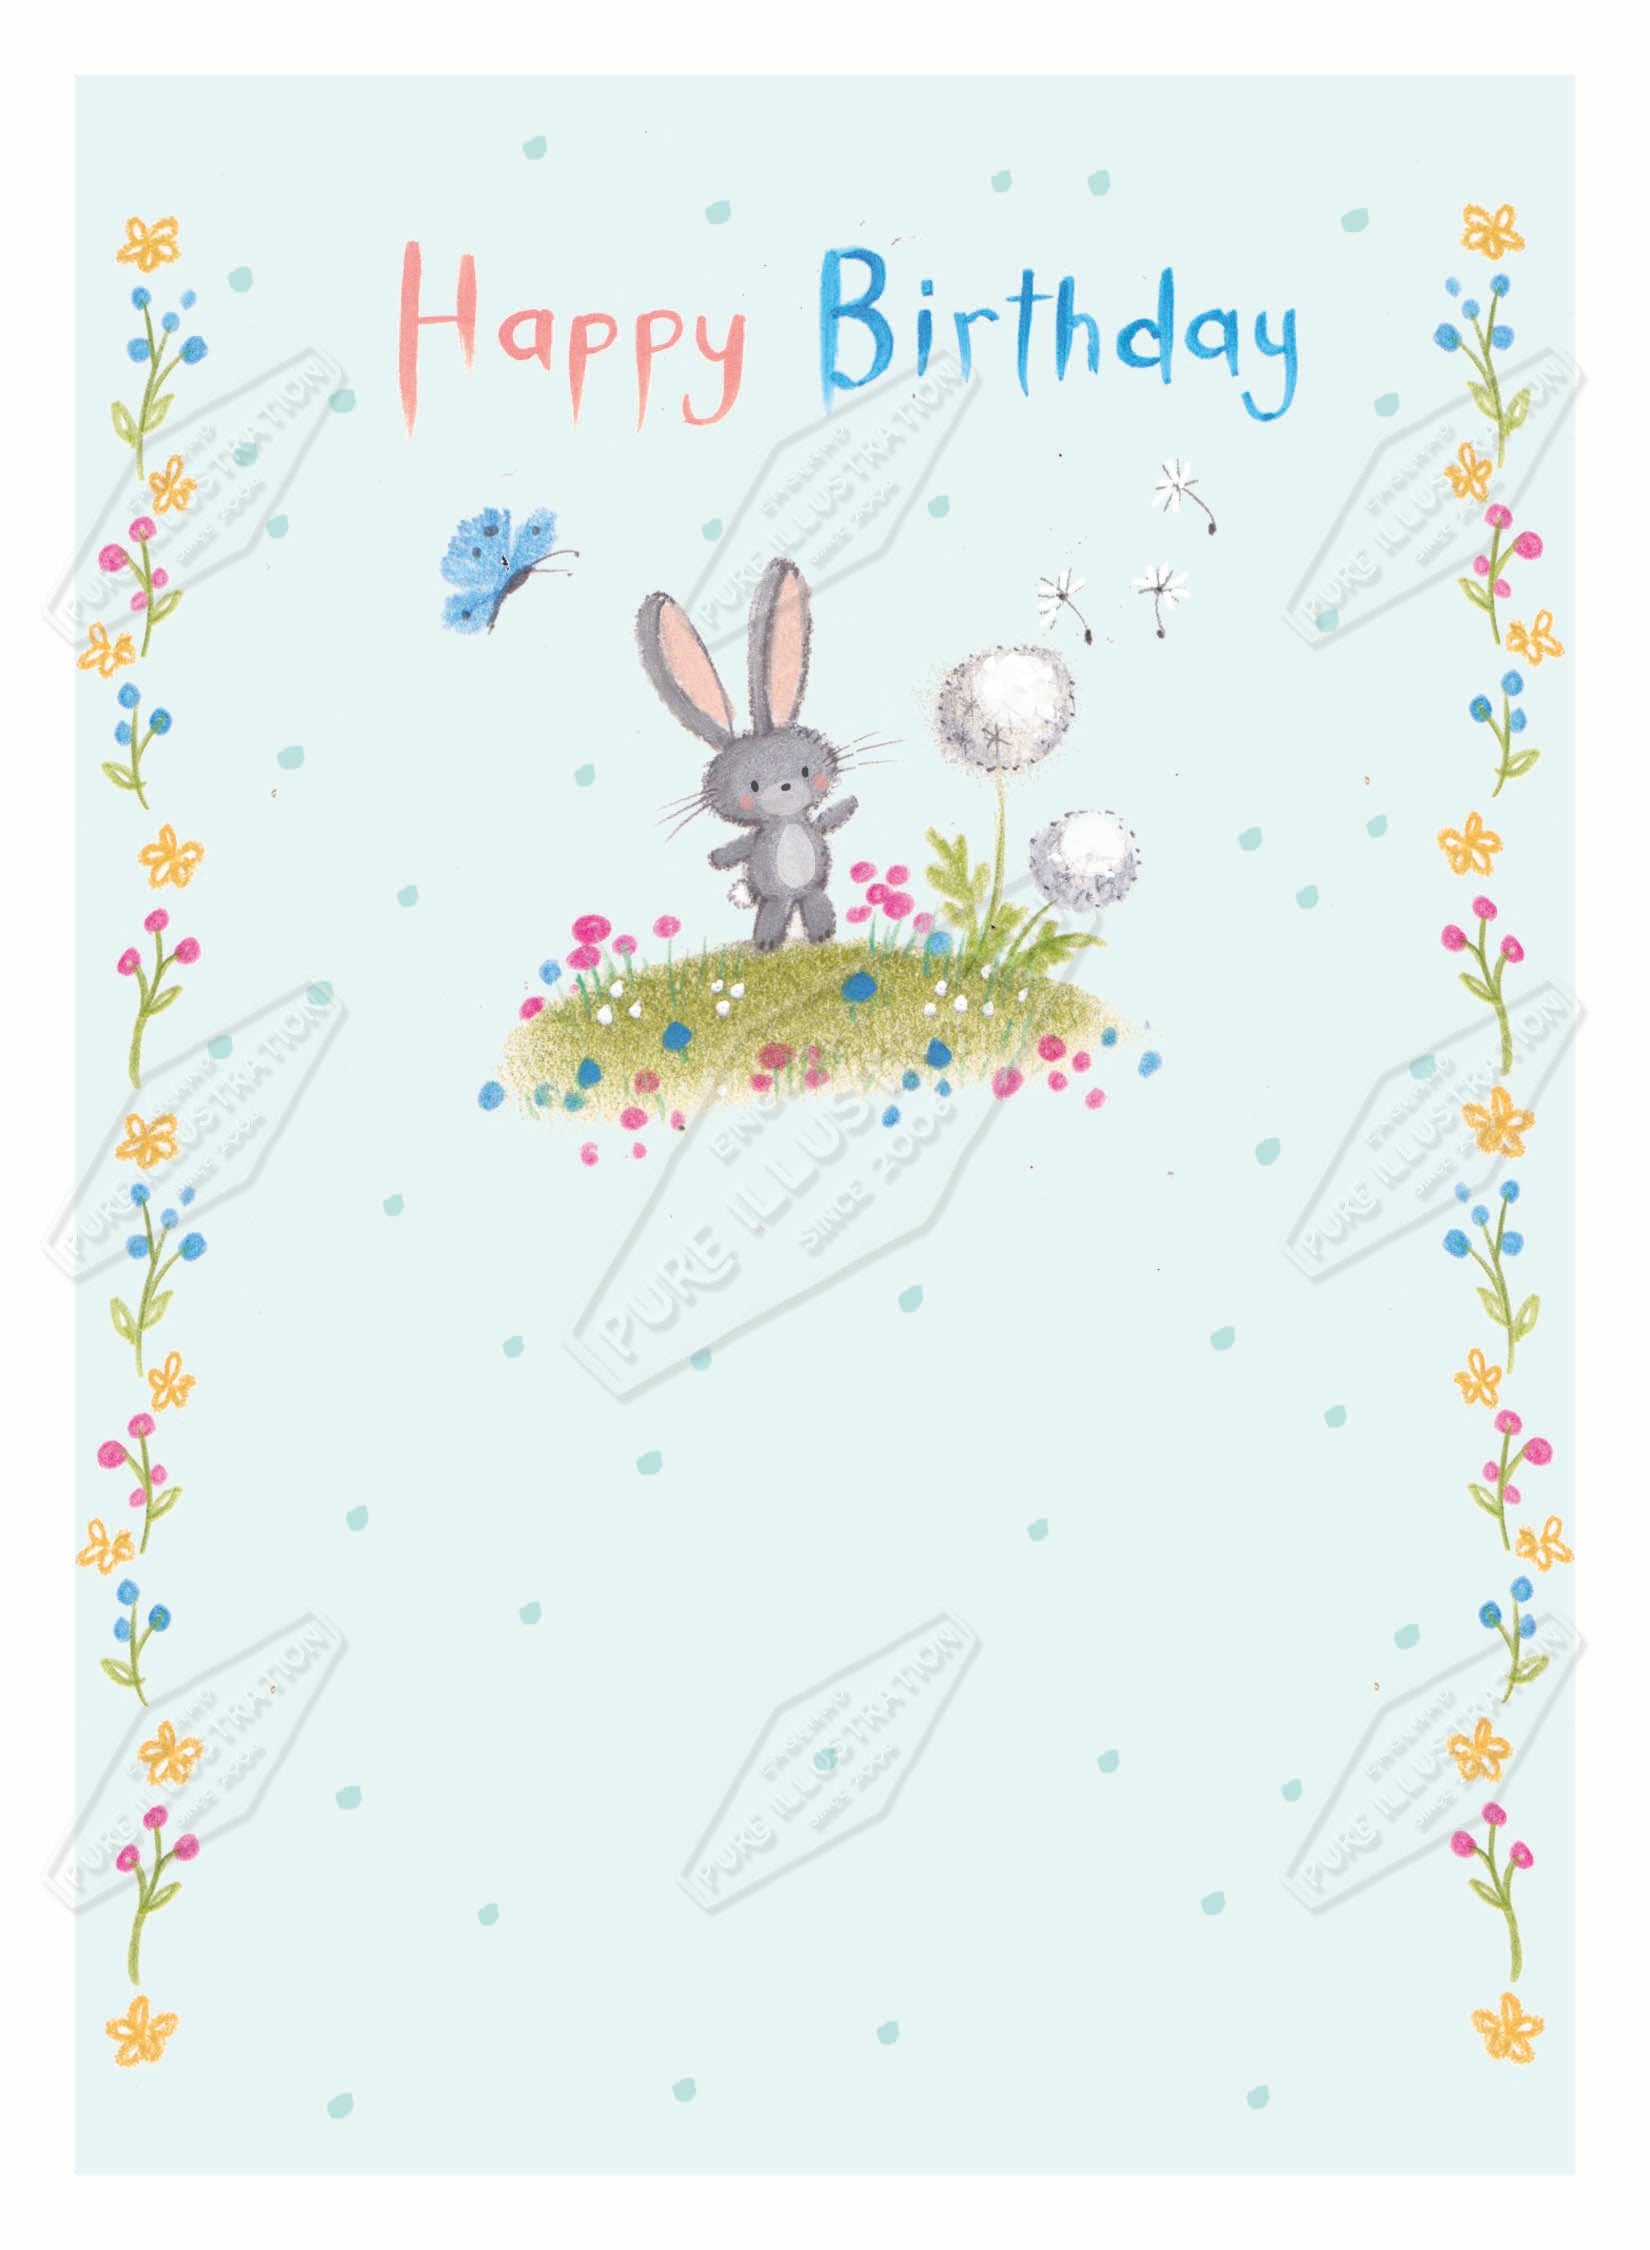 00035765AMA - Ally Marie is represented by Pure Art Licensing Agency - Birthday Greeting Card Design